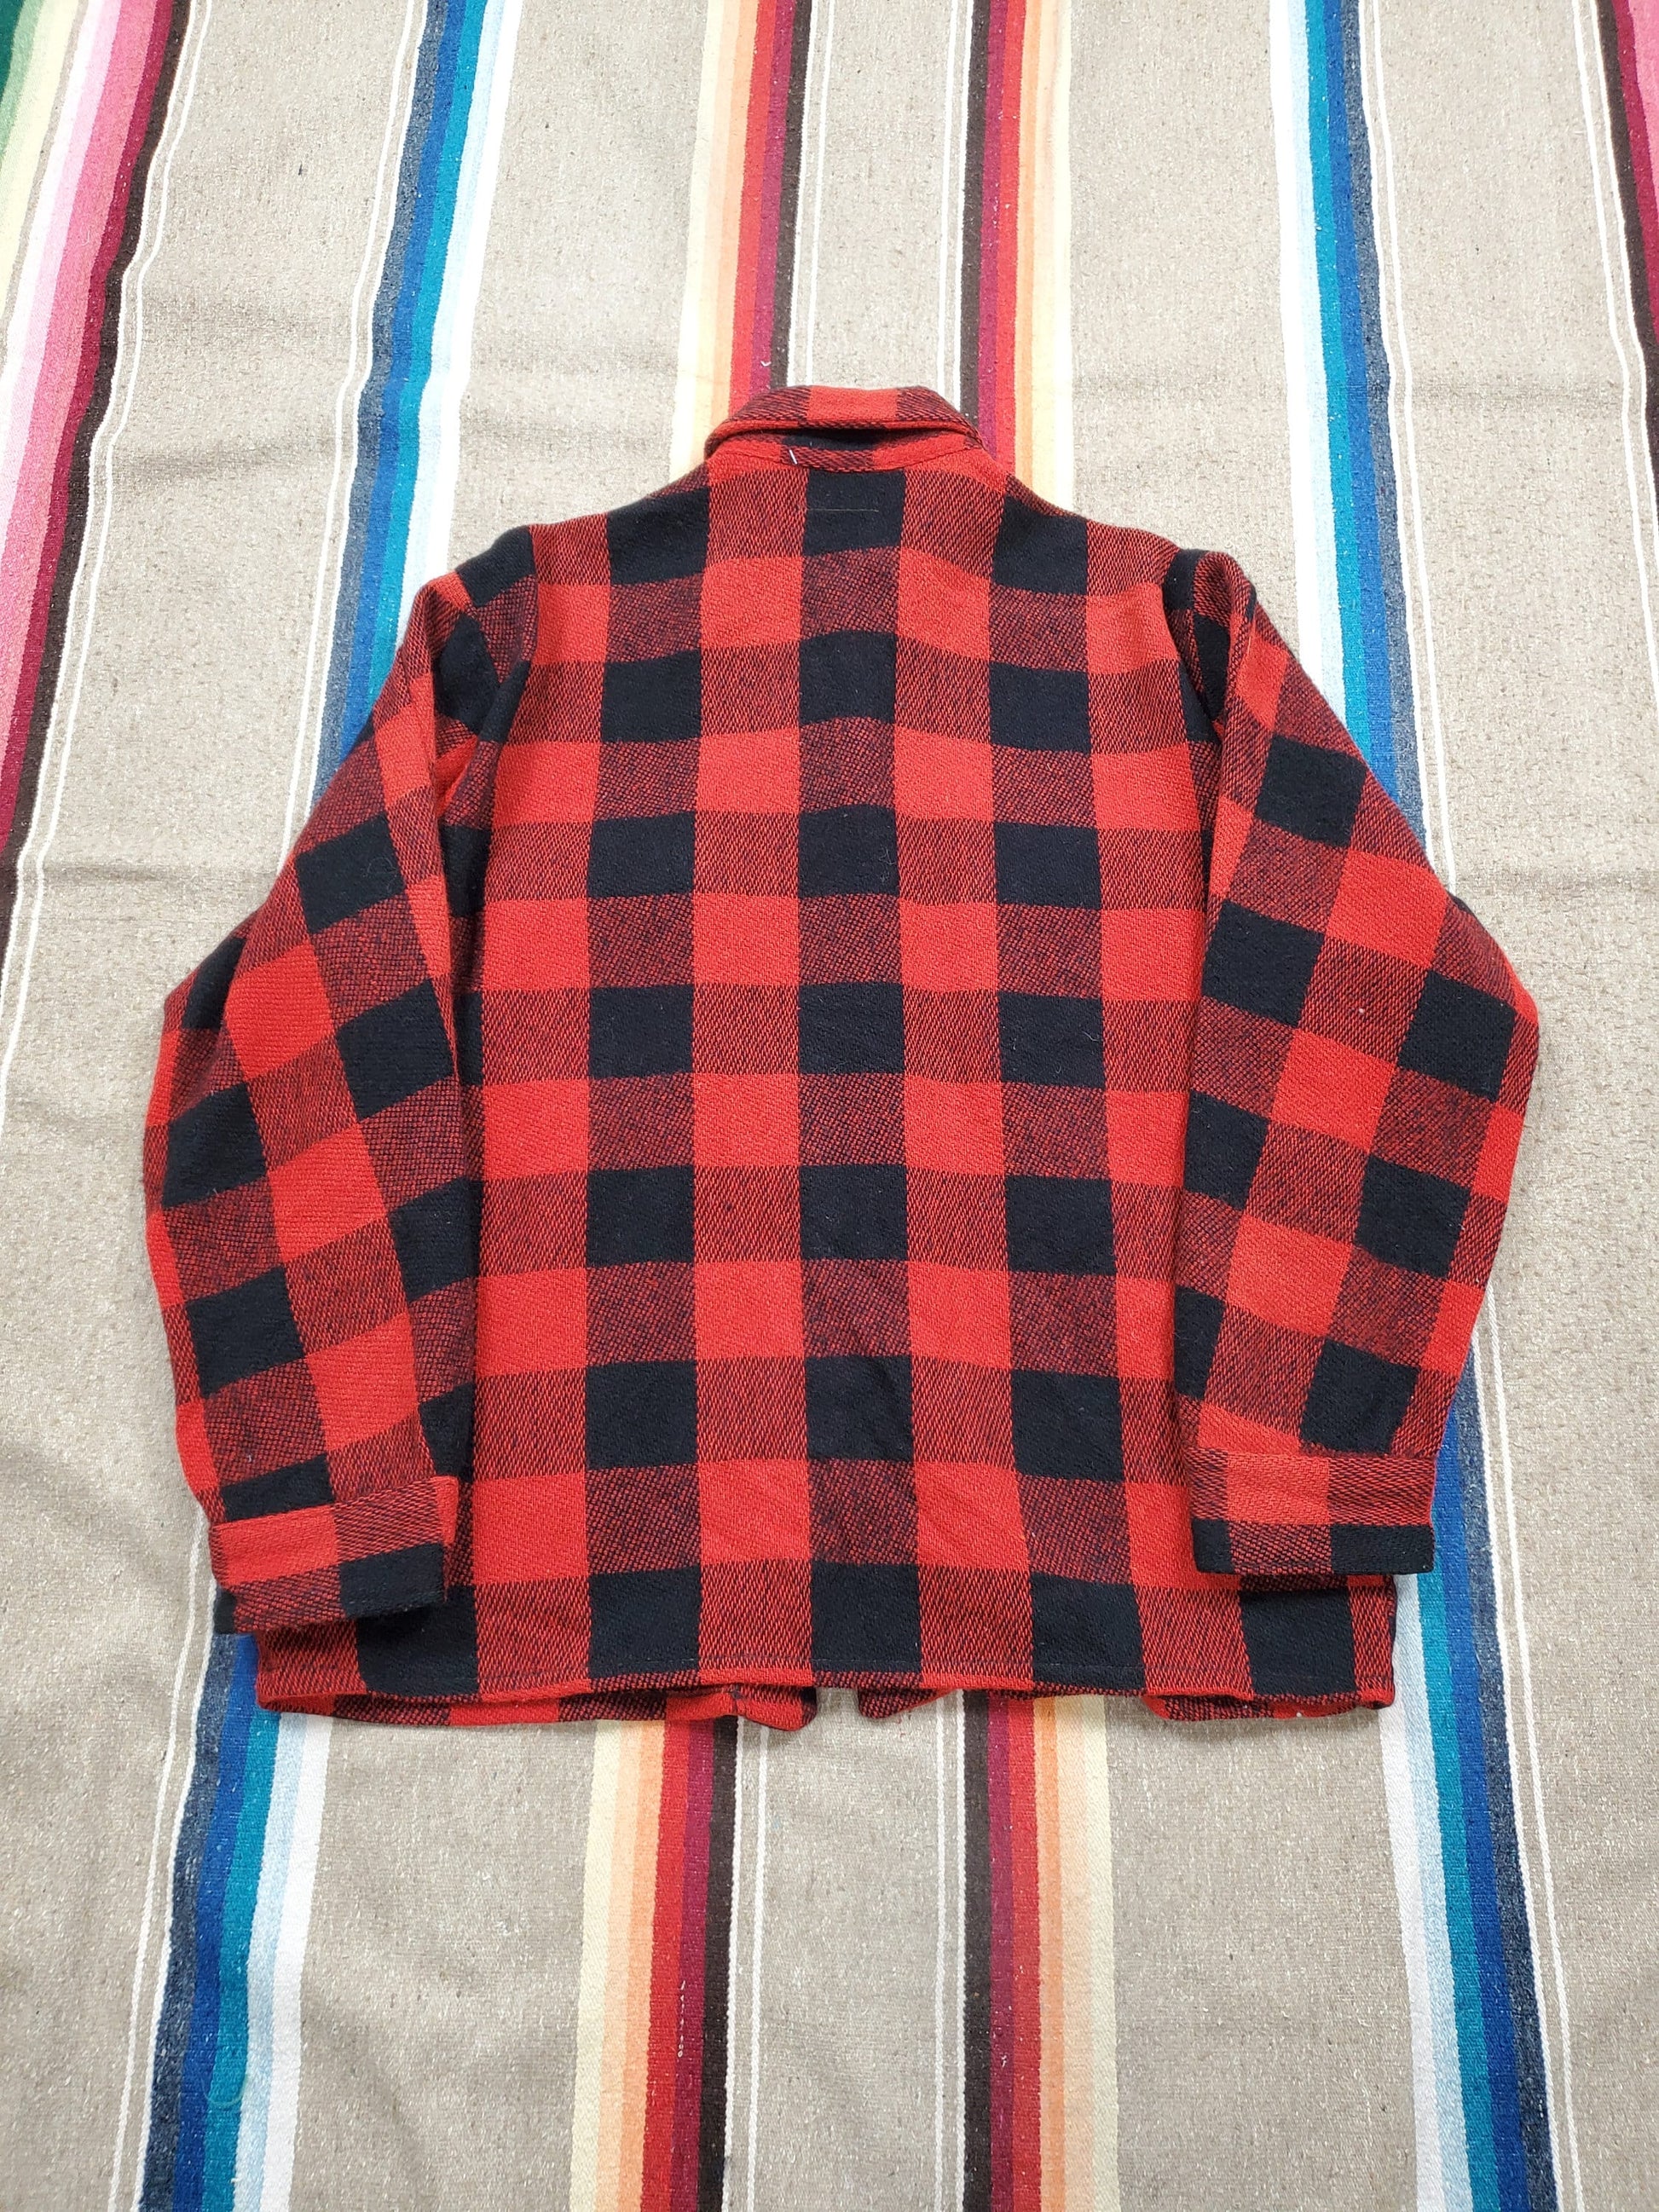 1960s/1970s Gambridge Red Buffalo Plaid Wool Shirt Jacket Made in Canada Size M/L